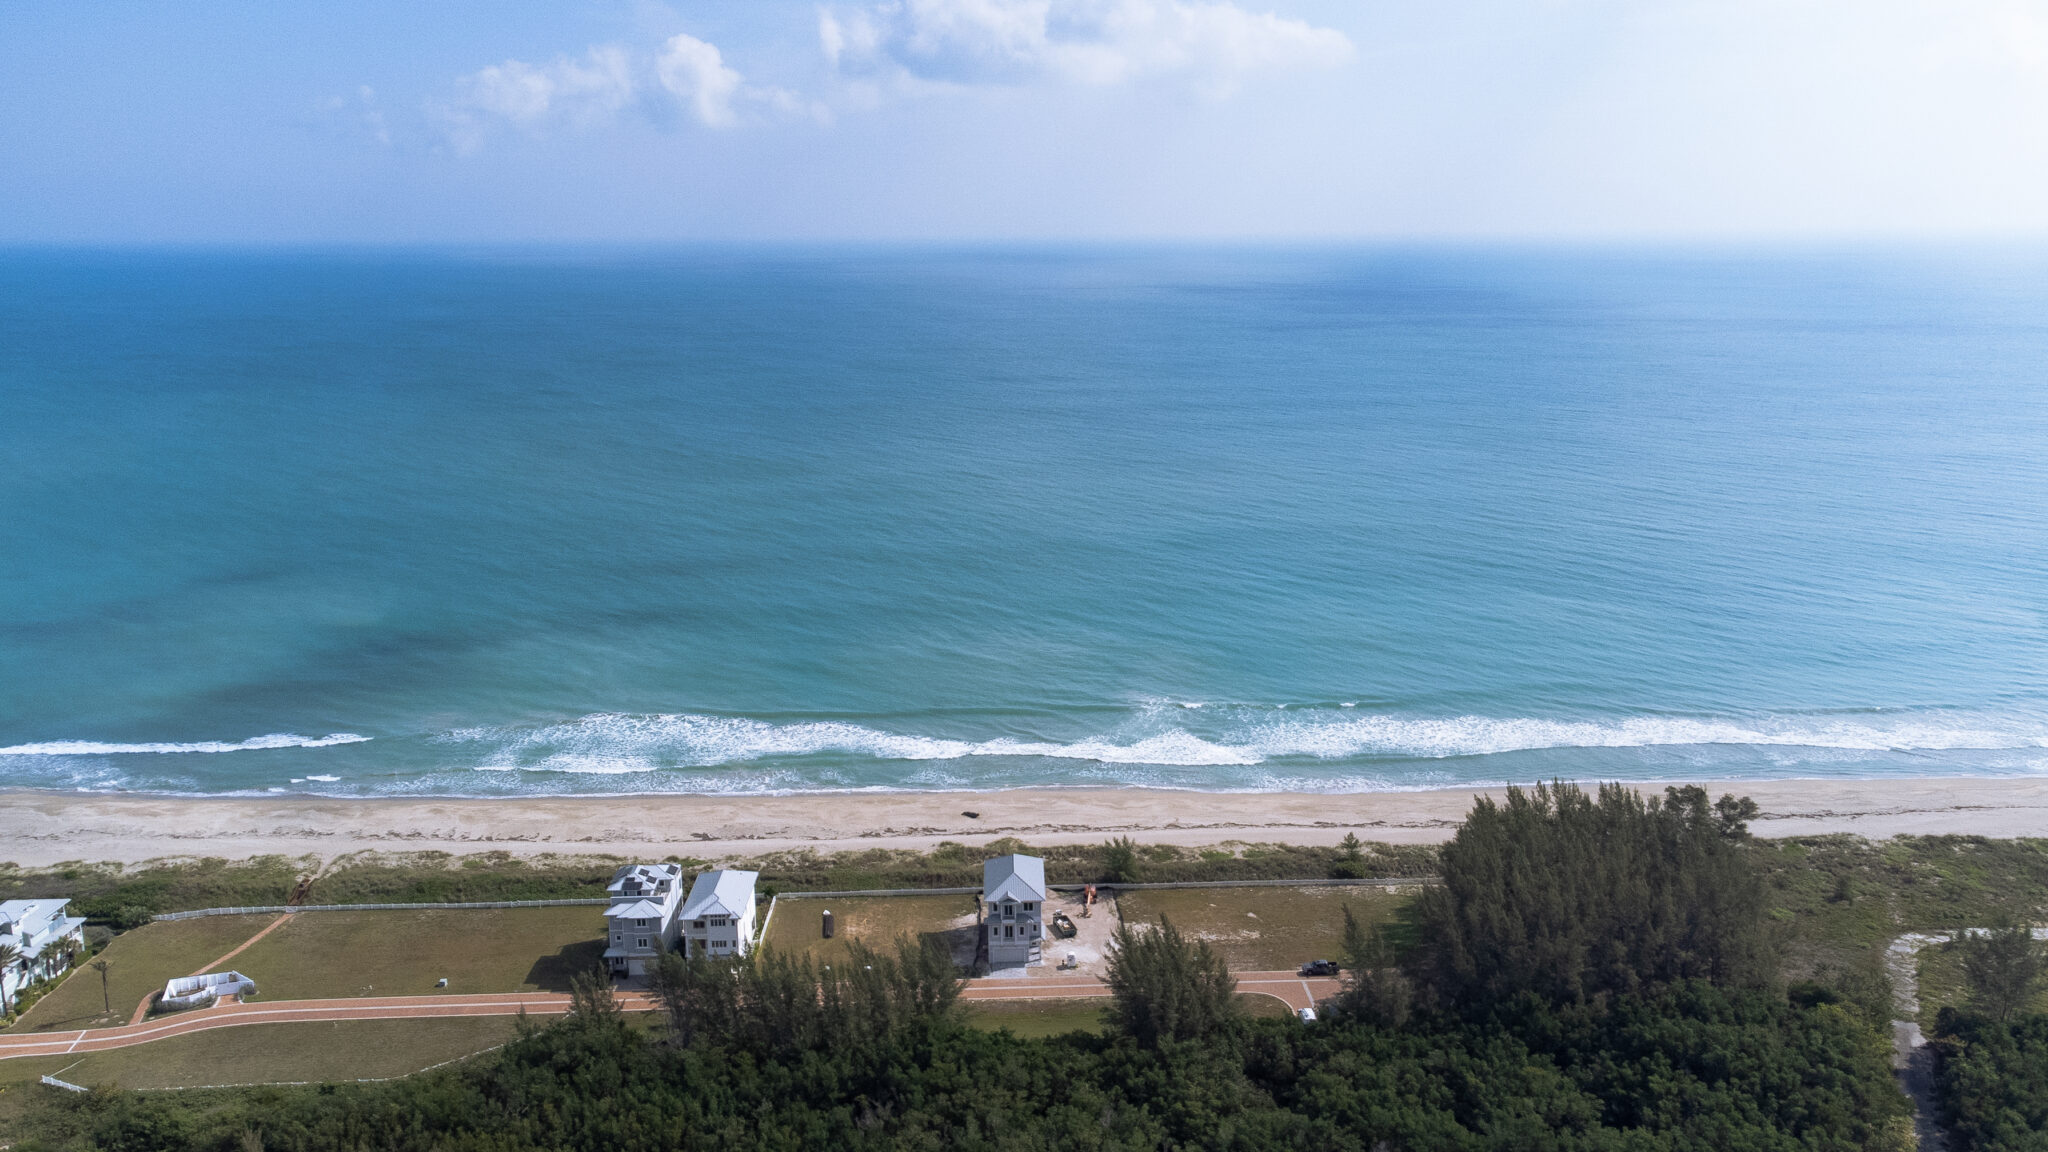 Drone Photography - Real Estate photography - Port St. Lucie - Palm Beach